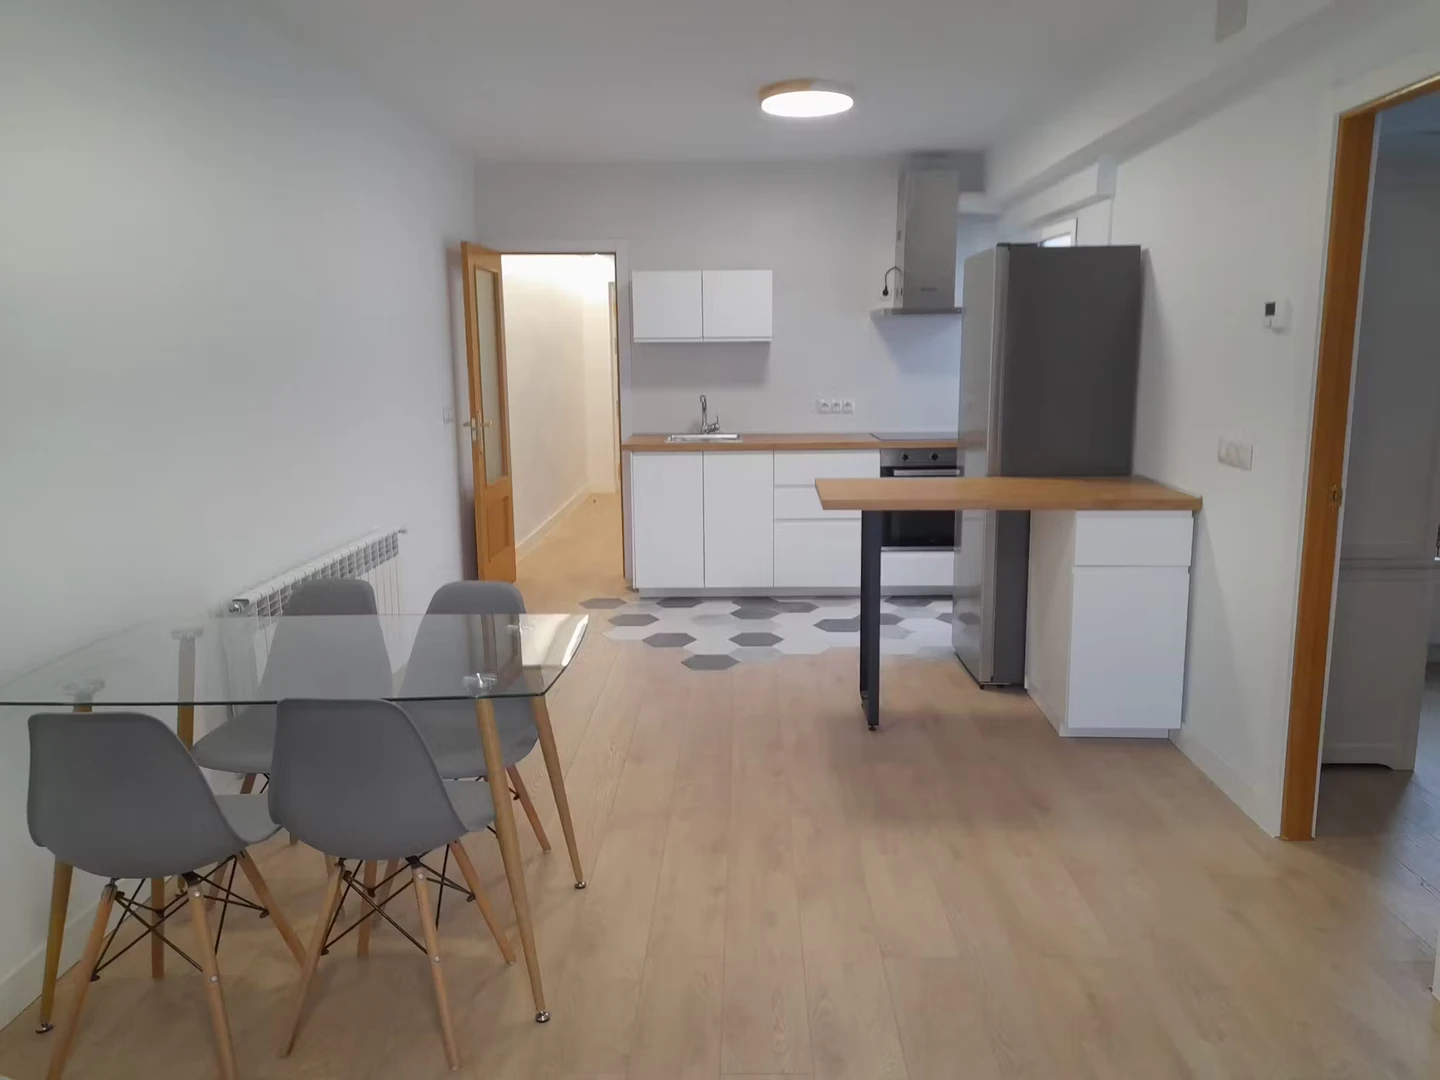 Room for rent in a shared flat in Valladolid